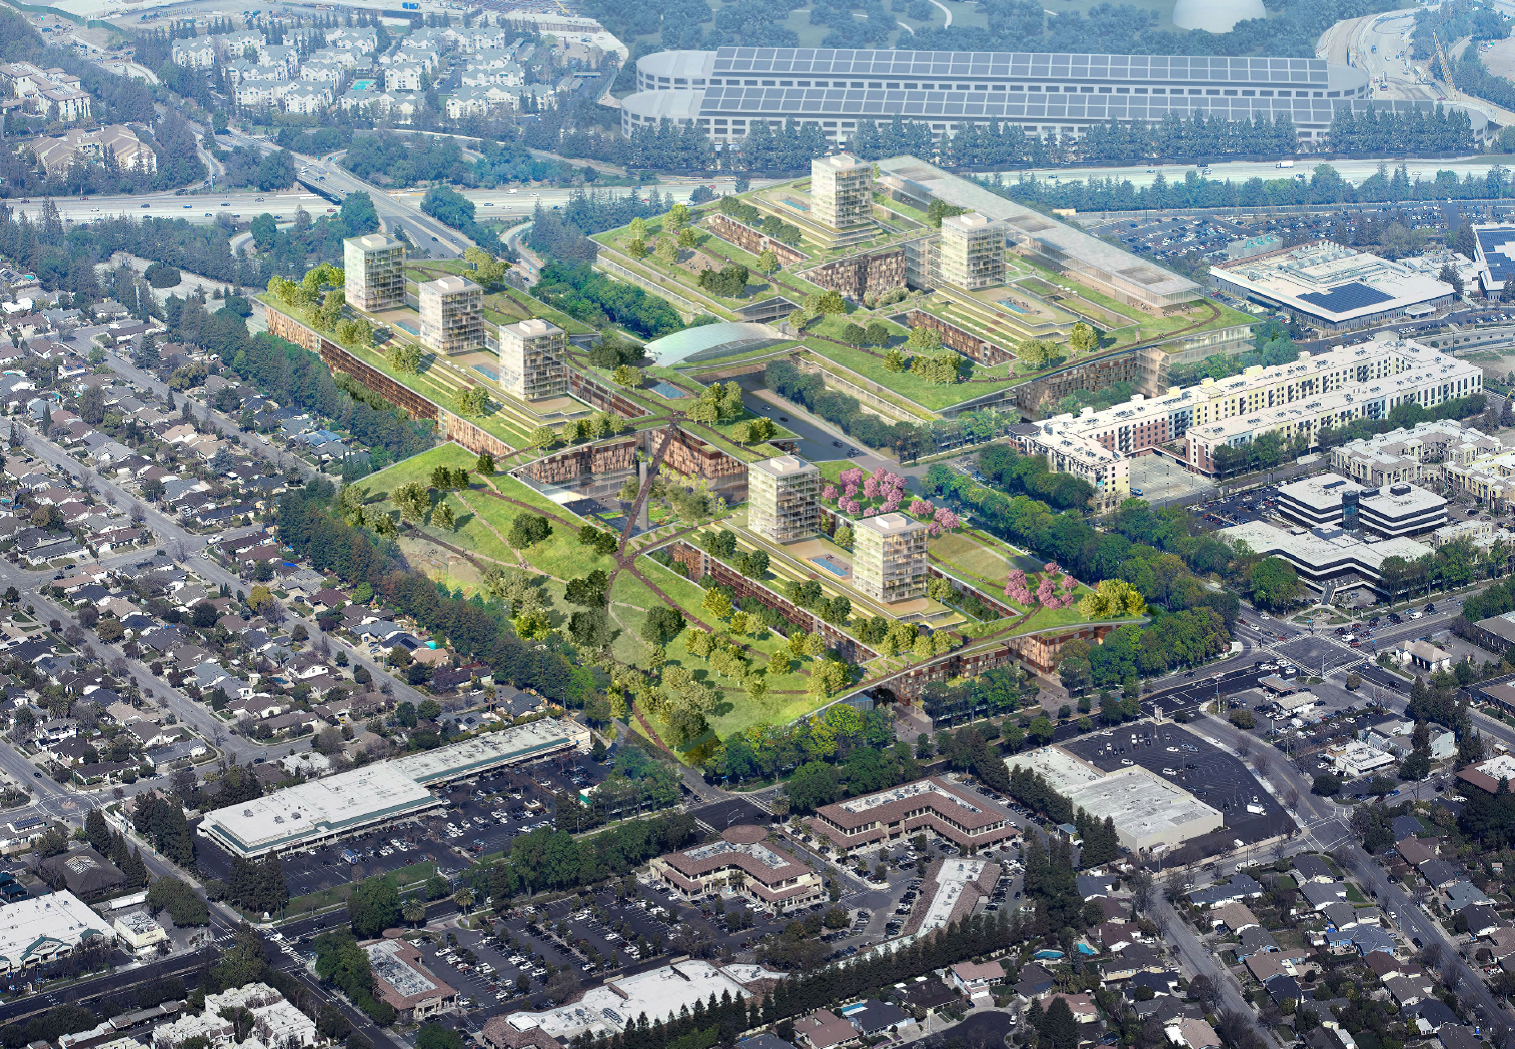 An illustration of a mixed-use redevelopment project with a green roof